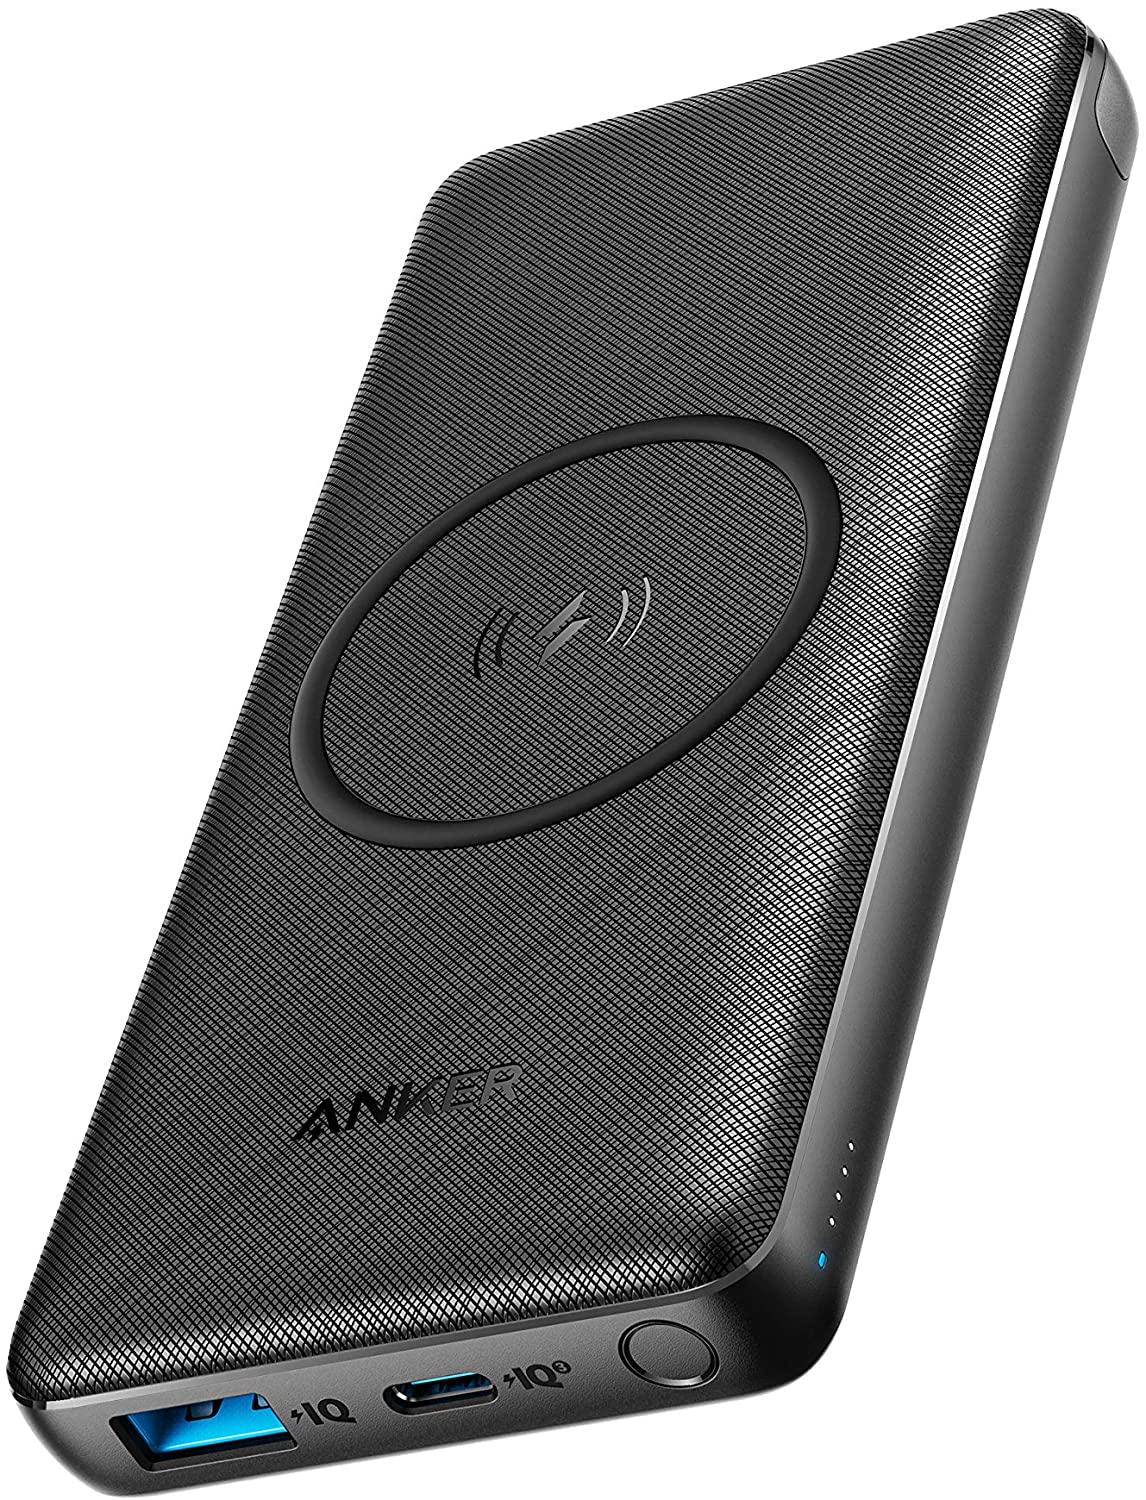 Anker、最大10W出力のワイヤレス充電対応モバイルバッテリー｢Anker PowerCore III 10000 Wireless｣を発売